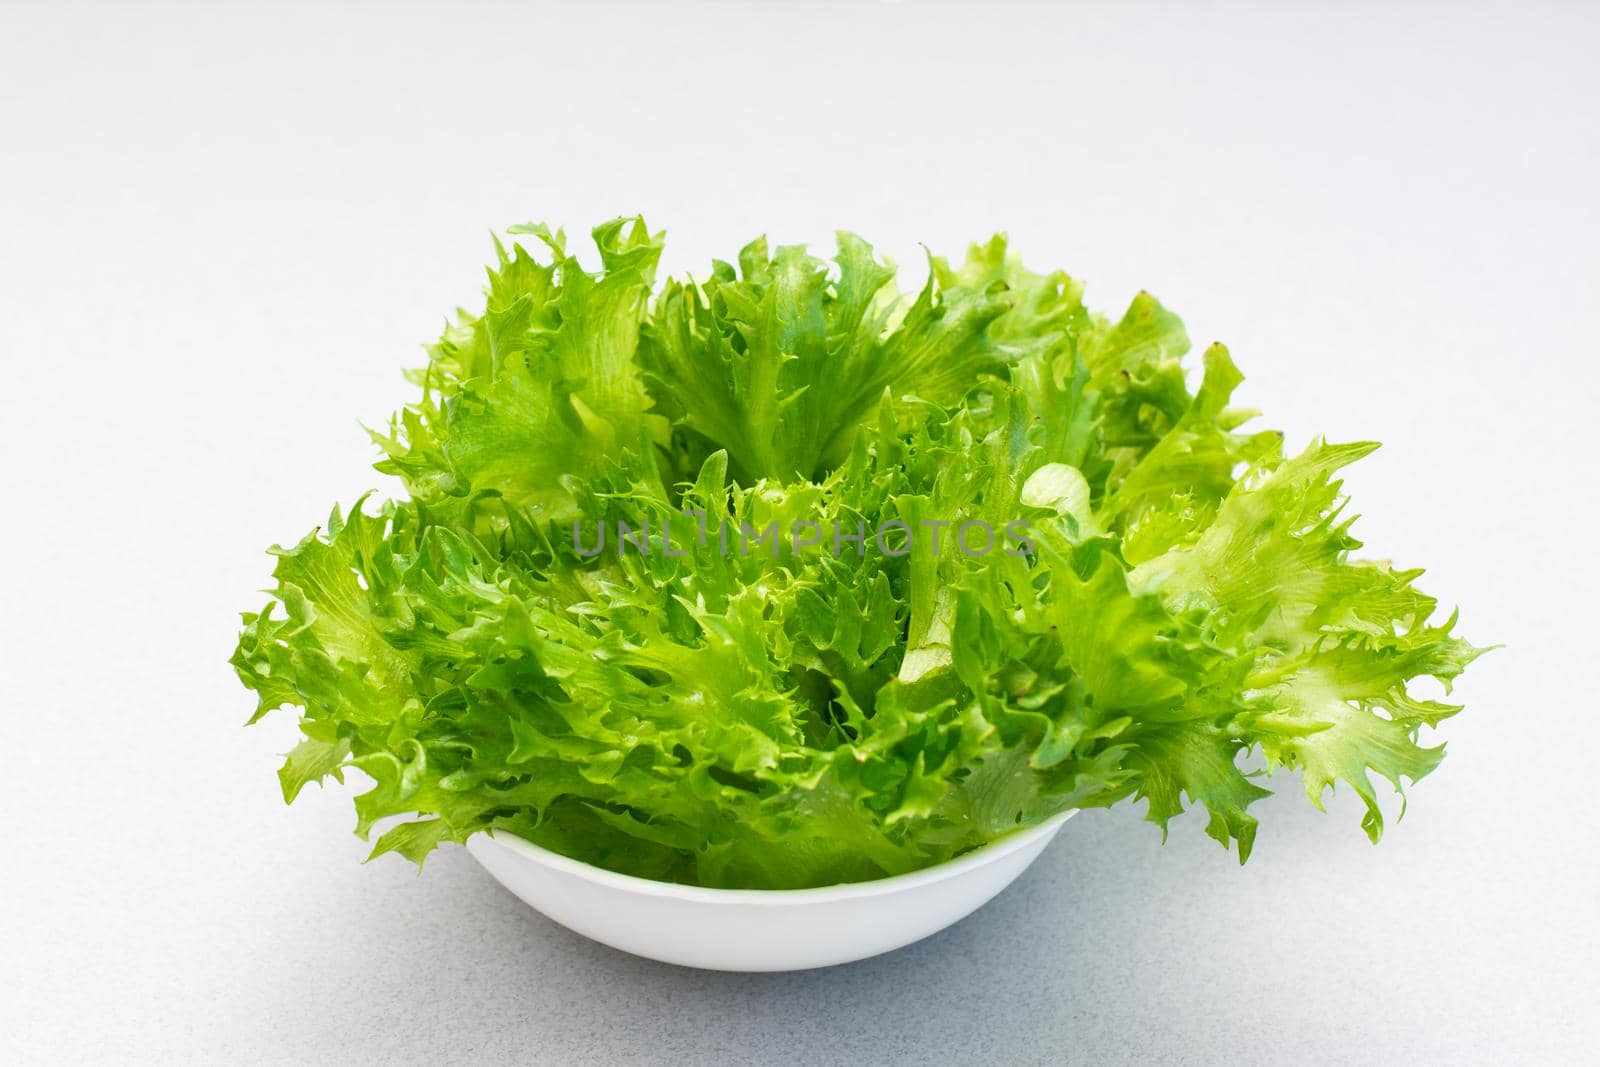 Fresh green lettuce leaves in a bowl on the table. Healthy eating by Aleruana